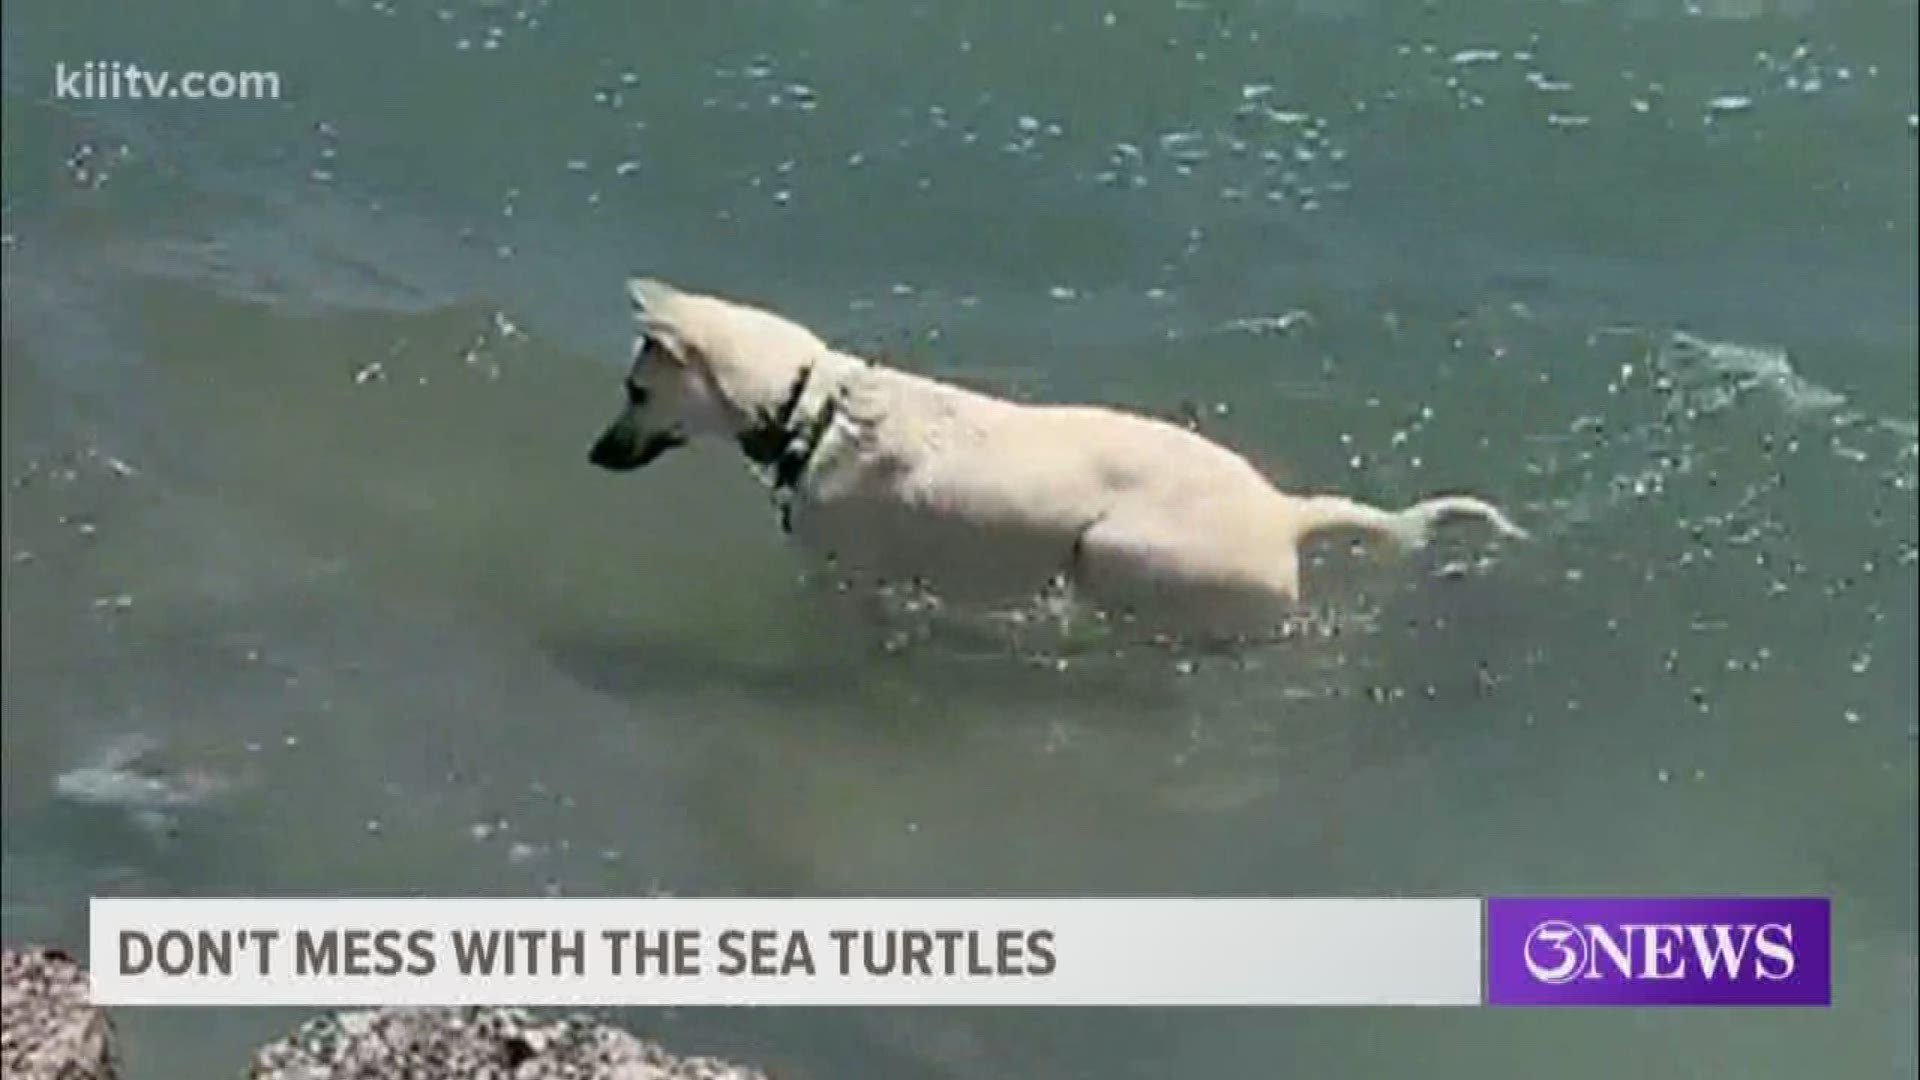 An influx of green sea turtles out at the Packery Channel has some beachgoers trying to interact with them. It turns out that's a big no-no, and you can actually get a heafty fine.